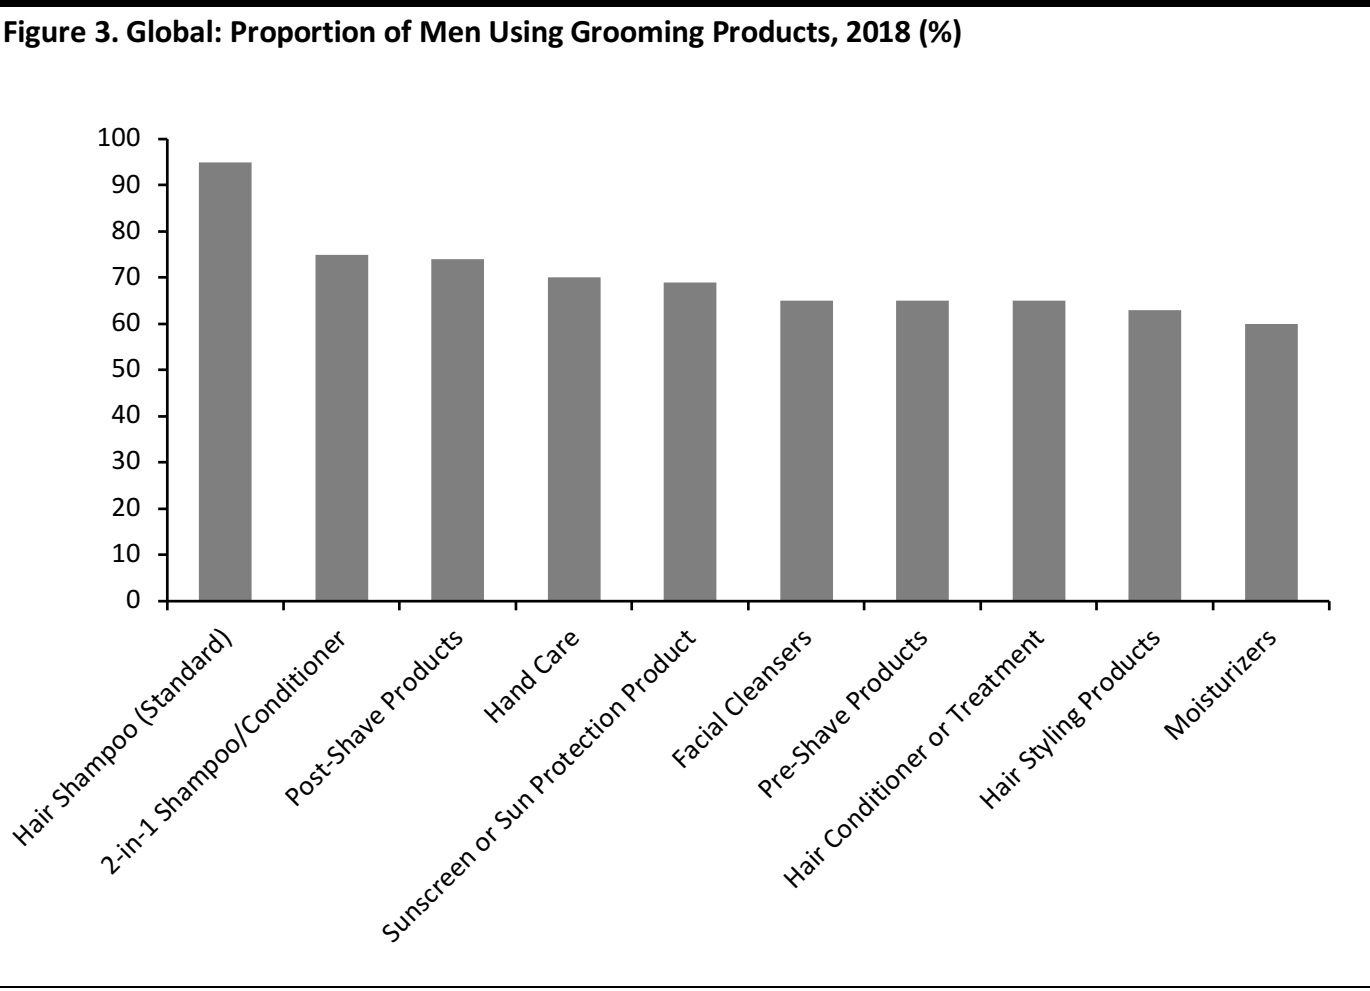 A $177.1 Billion Global Opportunity for Men's Grooming Products by